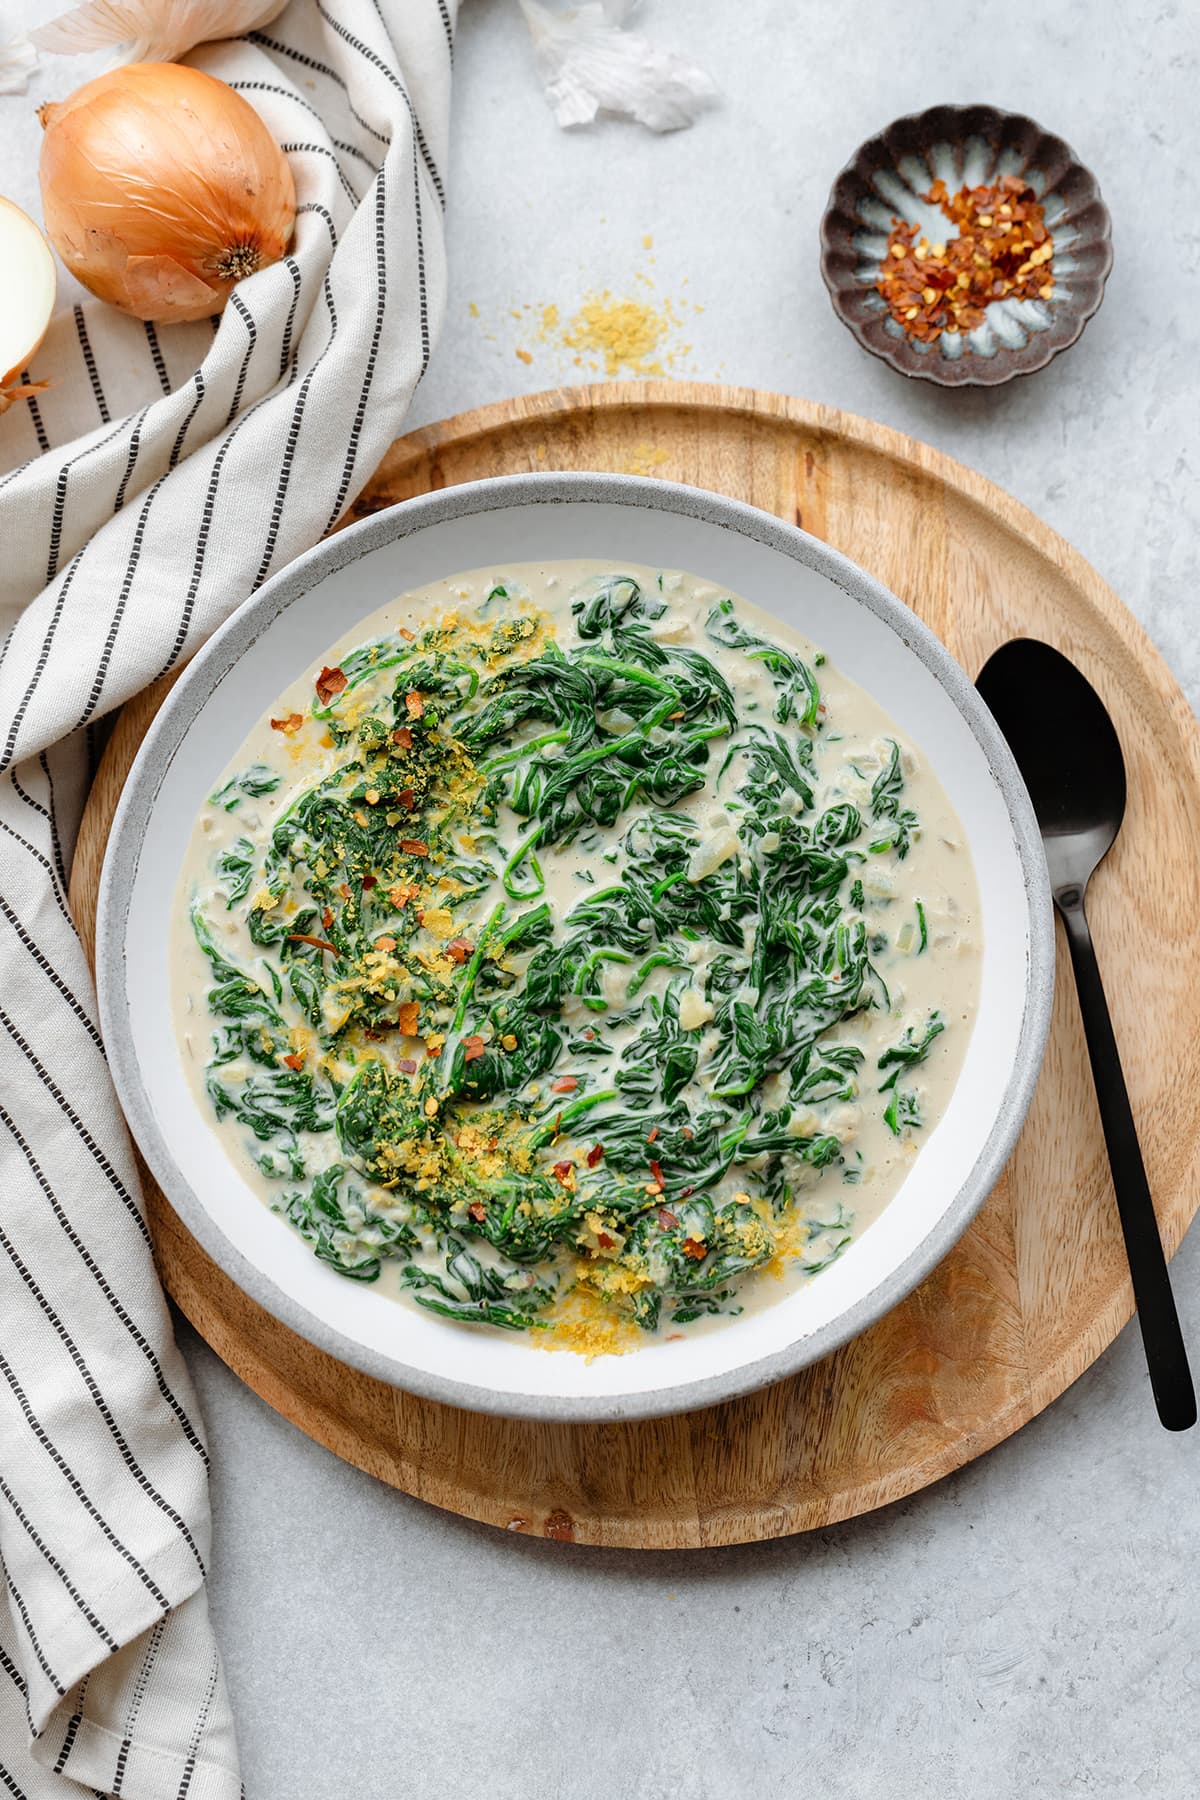 Creamy spinach served on a grey ceramic bowl sprinkled with nutritional yeast and chili flakes.